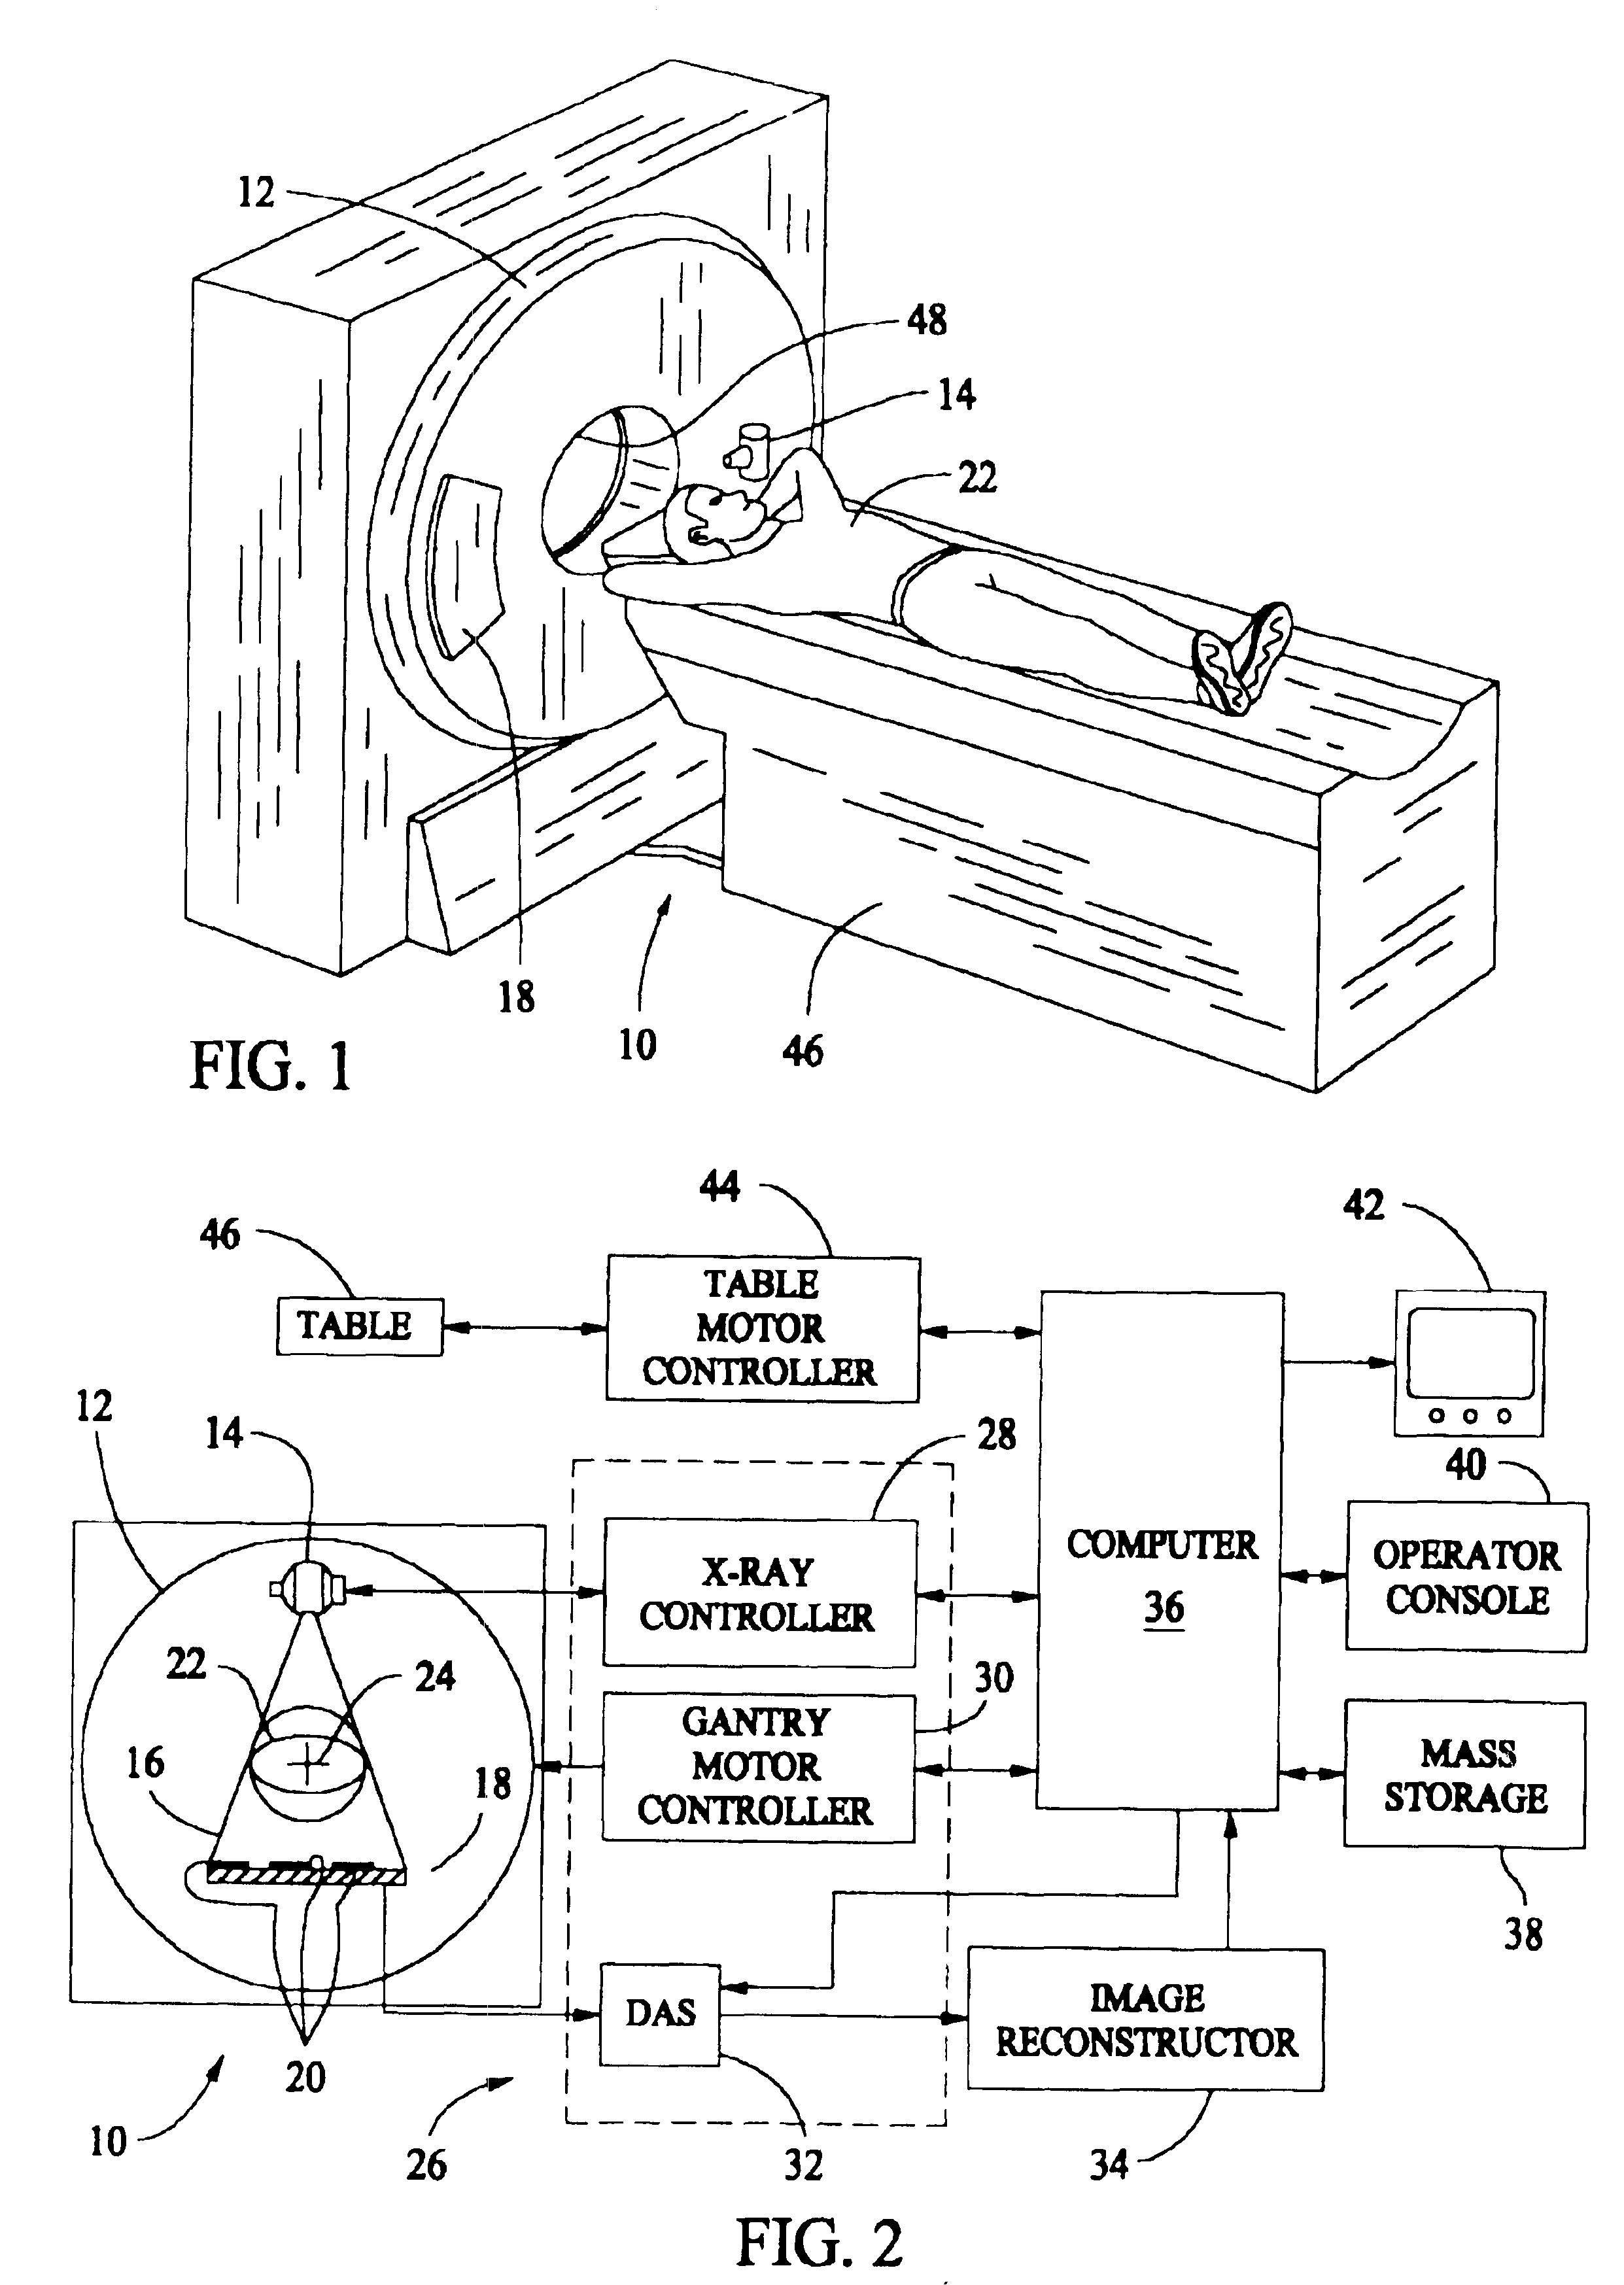 Methods and apparatus for computed tomography imaging